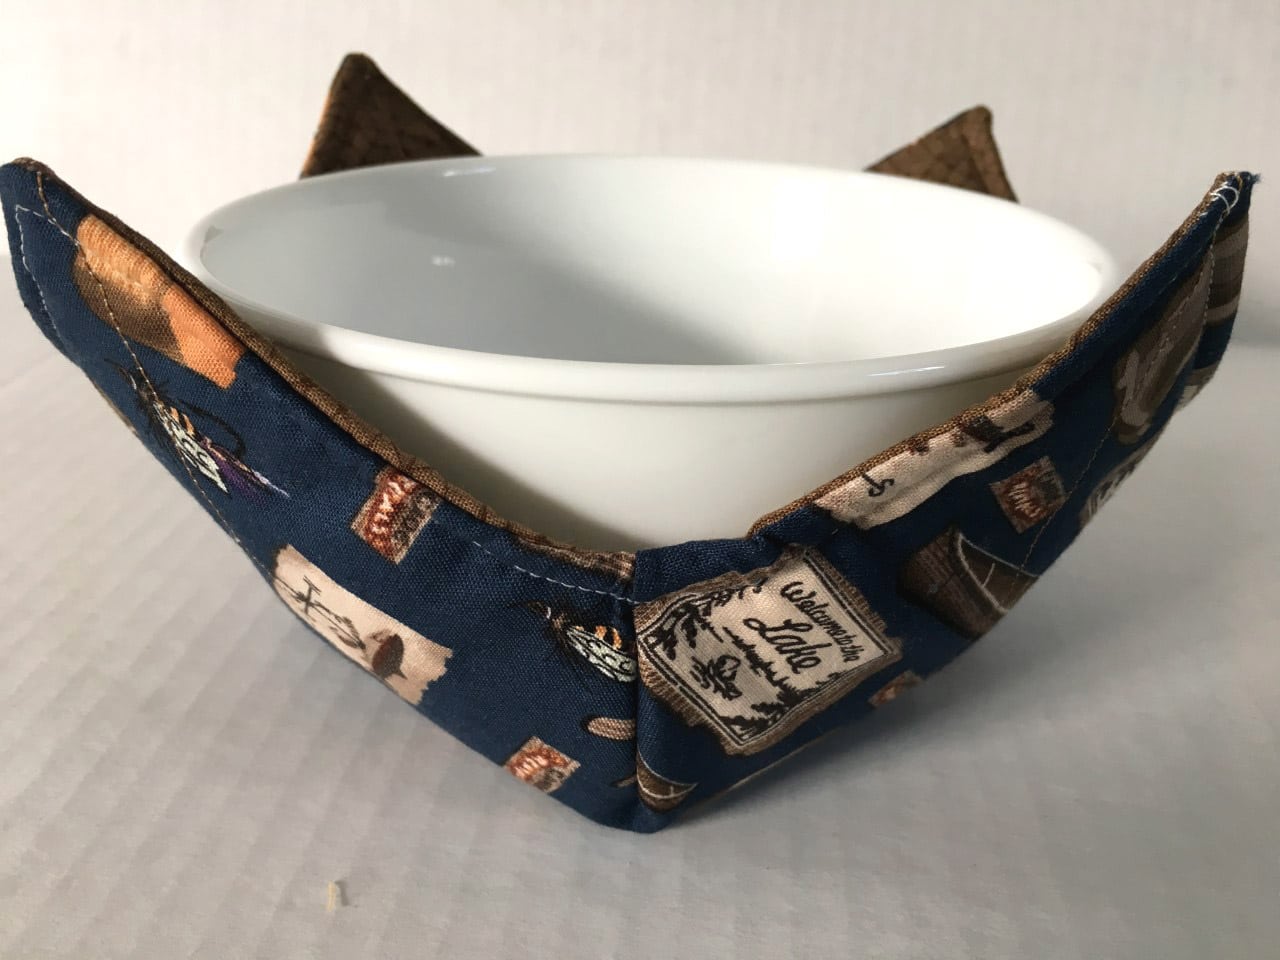 At The Lake Microwave Bowl Holder Cozy Hot Pad » Made In Michigan